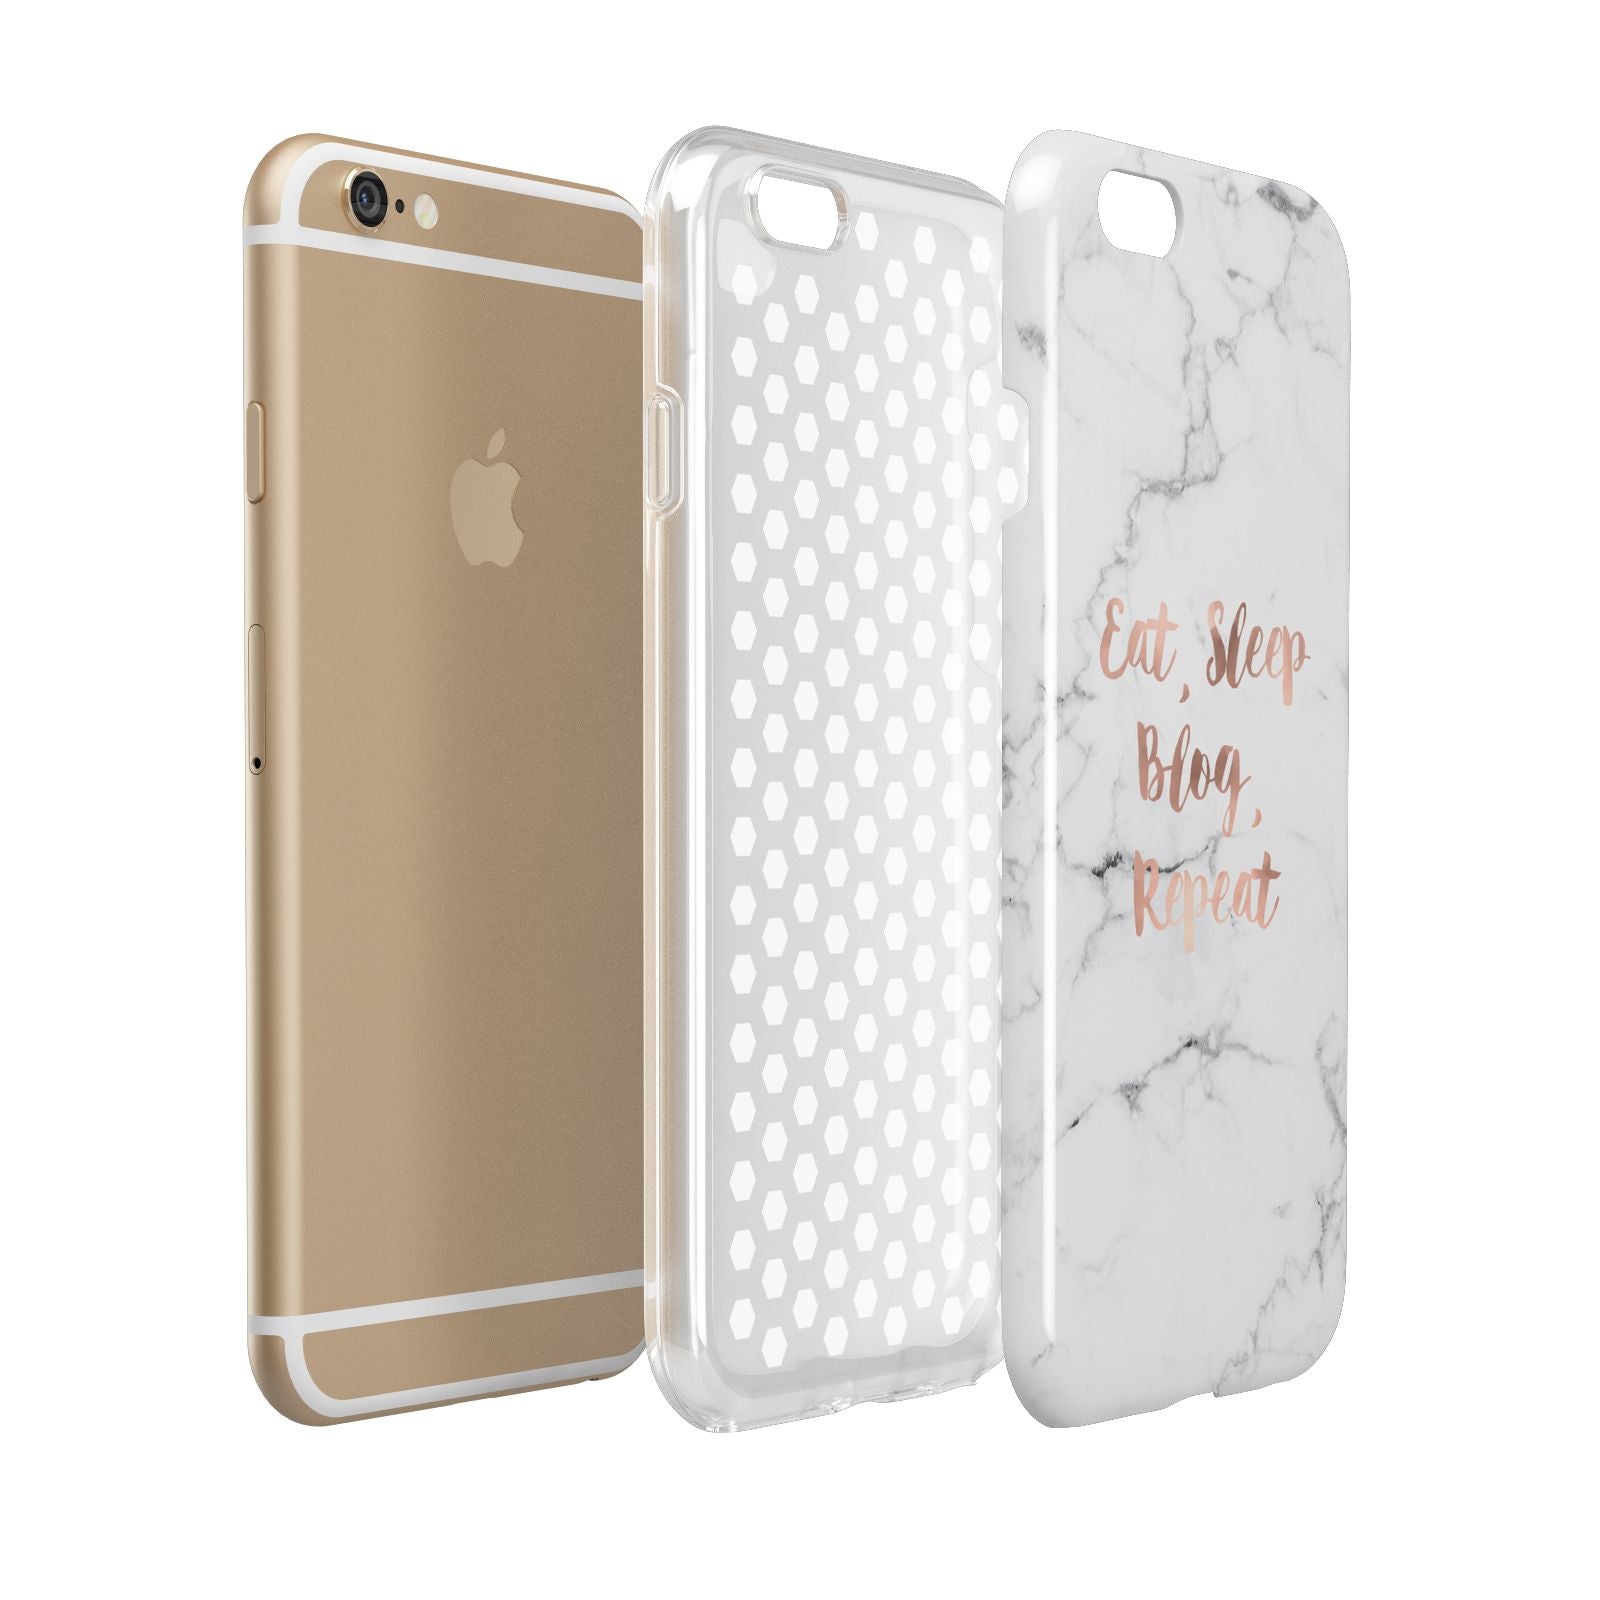 Eat Sleep Blog Repeat Marble Effect Apple iPhone 6 3D Tough Case Expanded view